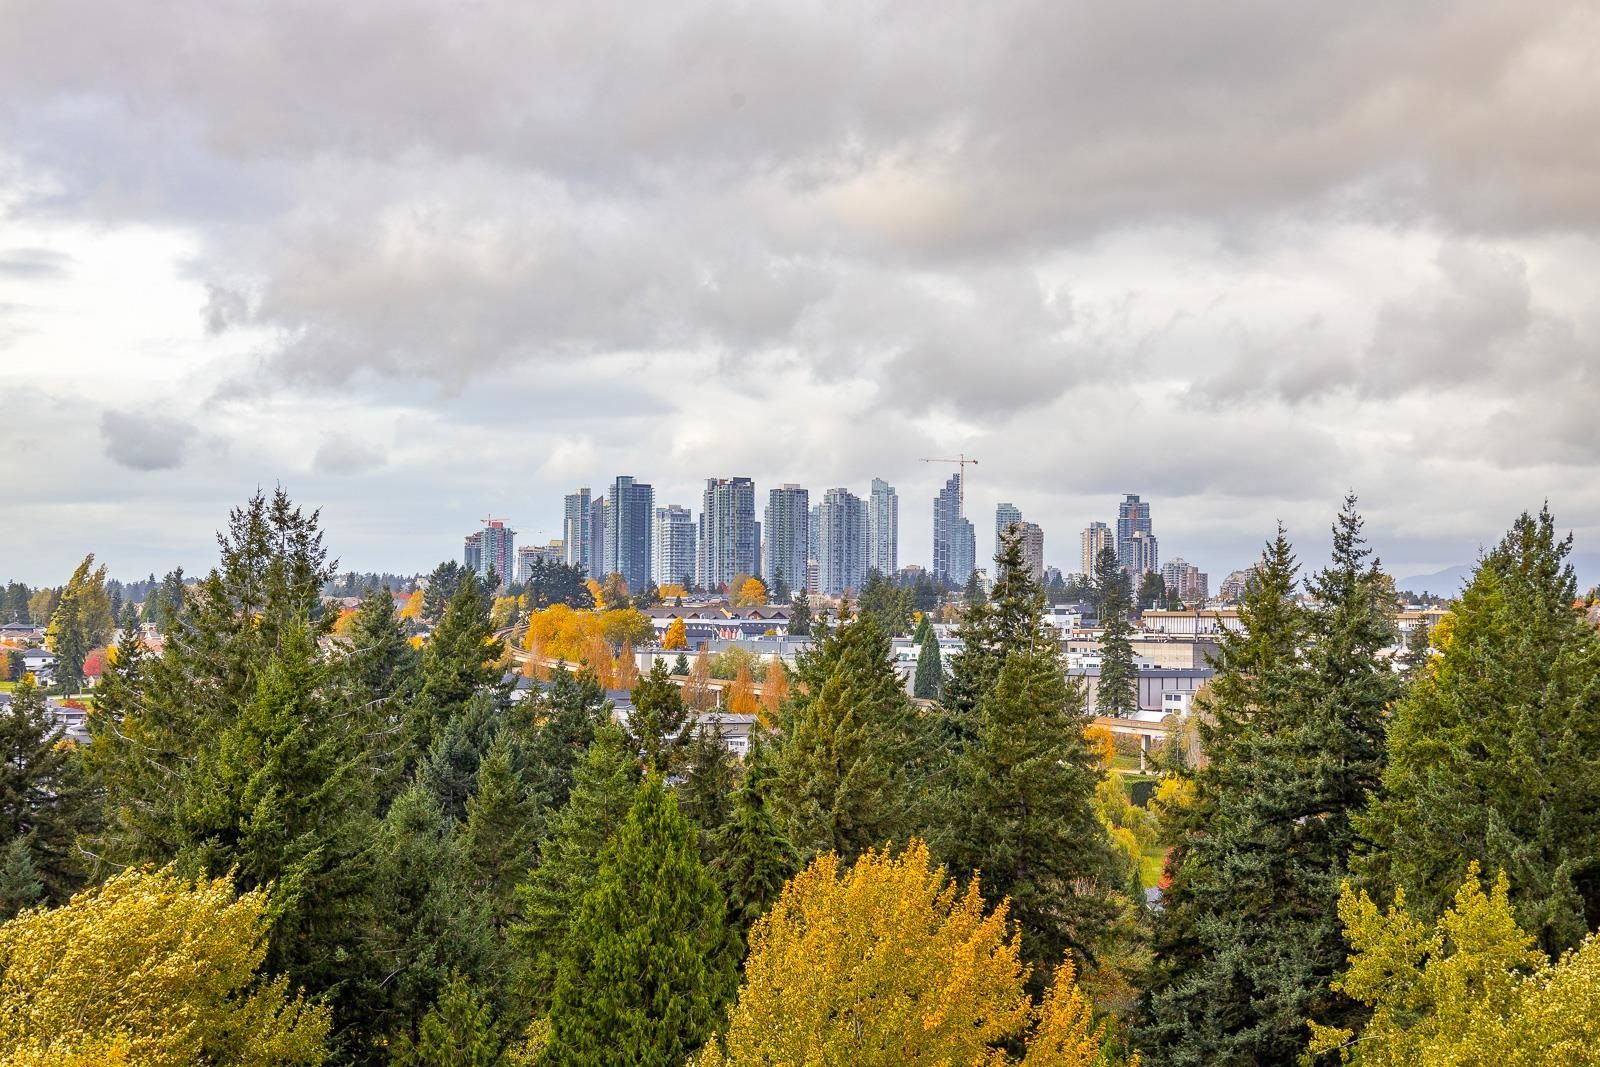 Main Photo: 1408 6837 STATION HILL Drive in Burnaby: South Slope Condo for sale (Burnaby South)  : MLS®# R2629202